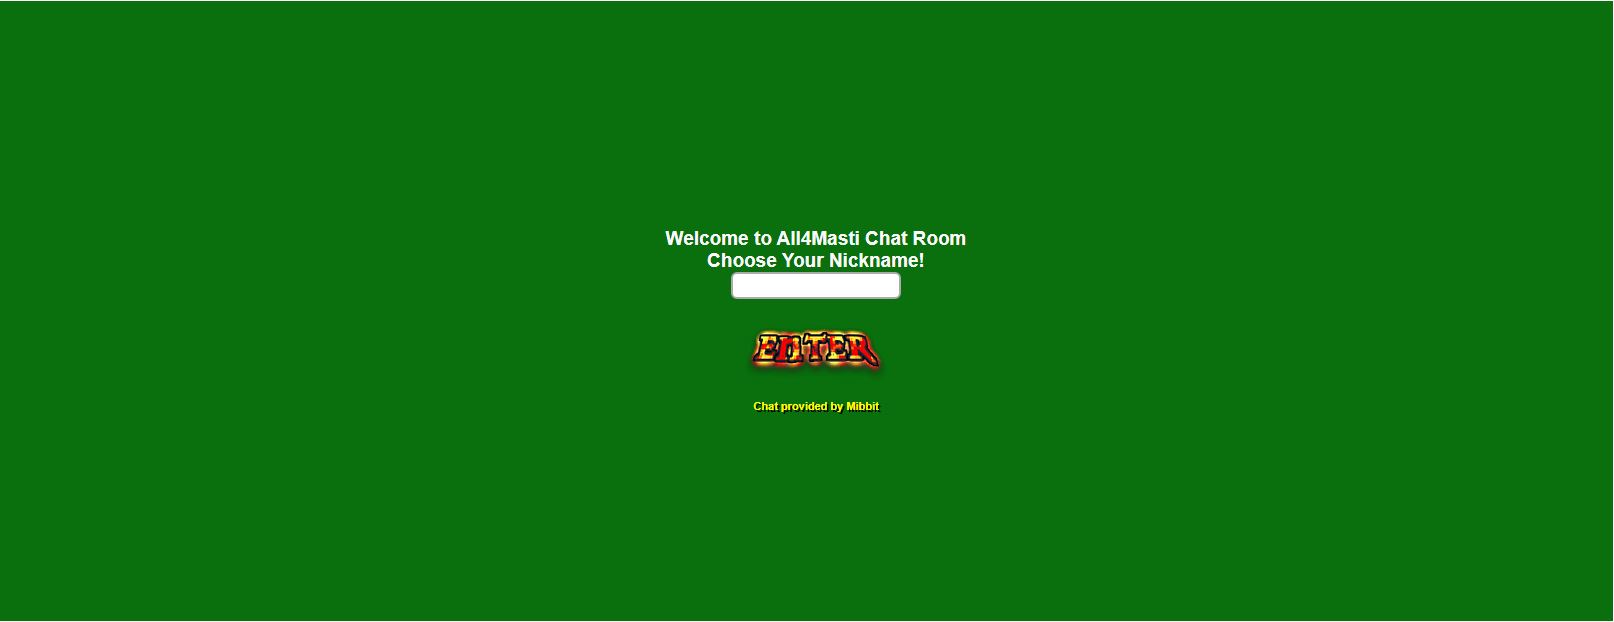 Online chat rooms